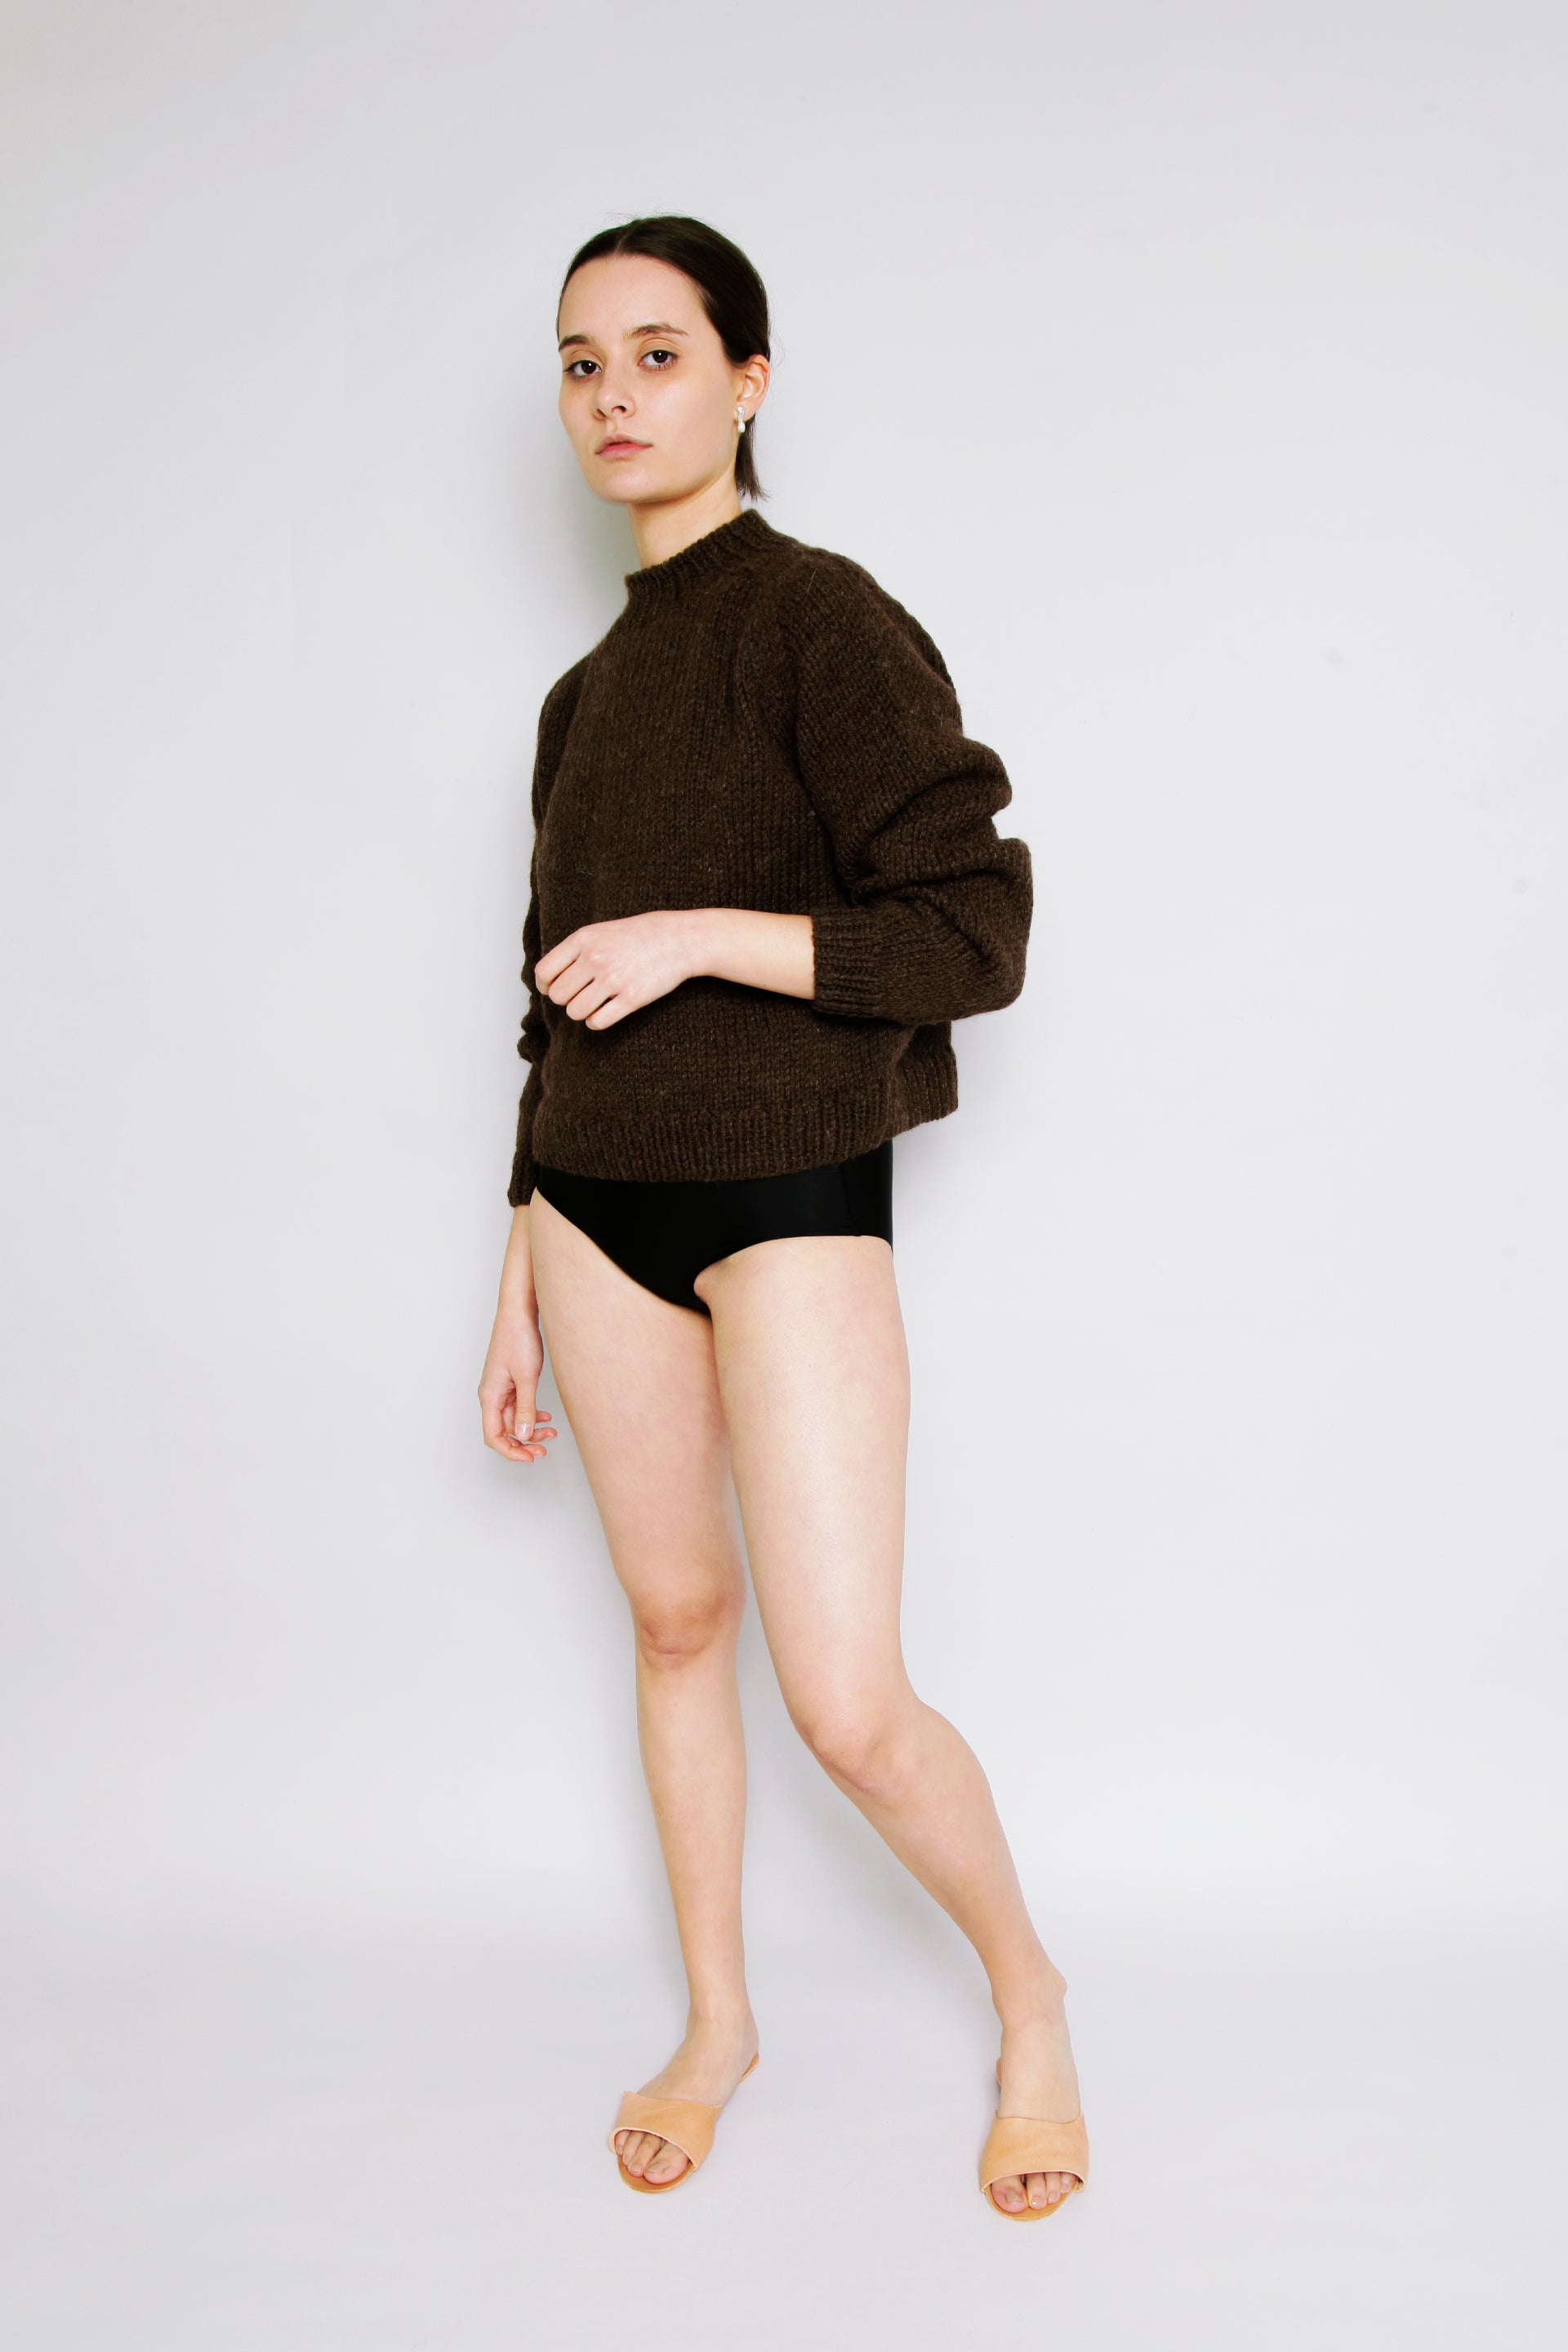 UNDYED, WOOL, HAND-KNITTED, JUMPER, SWEATER, STYLISH, SUSTAINABLE, HAND-CRAFTED, WOMENSWEAR